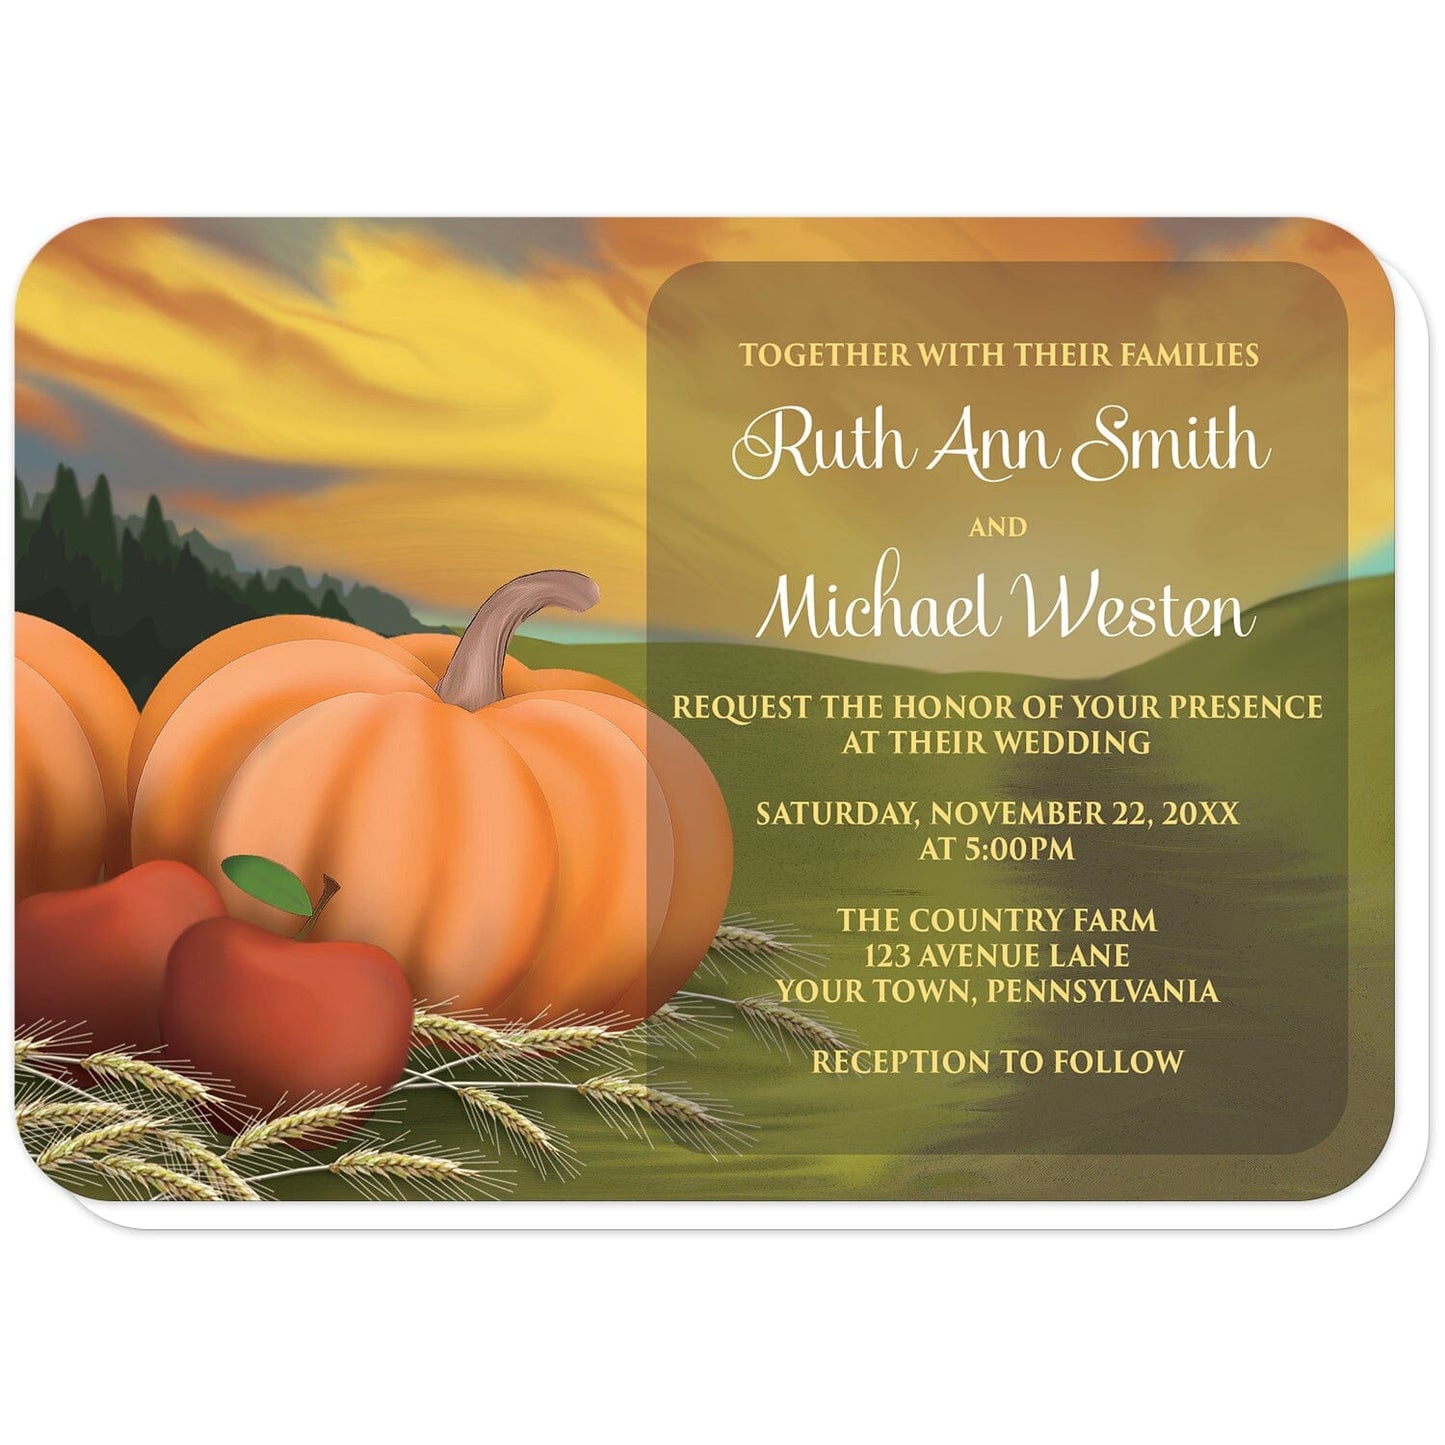 Country Autumn Harvest Wedding Invitations (with rounded corners) at Artistically Invited. Country autumn harvest wedding invitations with pumpkins, apples, and hay stems in a country farm or open fields illustration. Your personalized marriage celebration details are printed in white and yellow over a darker frame area over the scene to the right of the harvest.